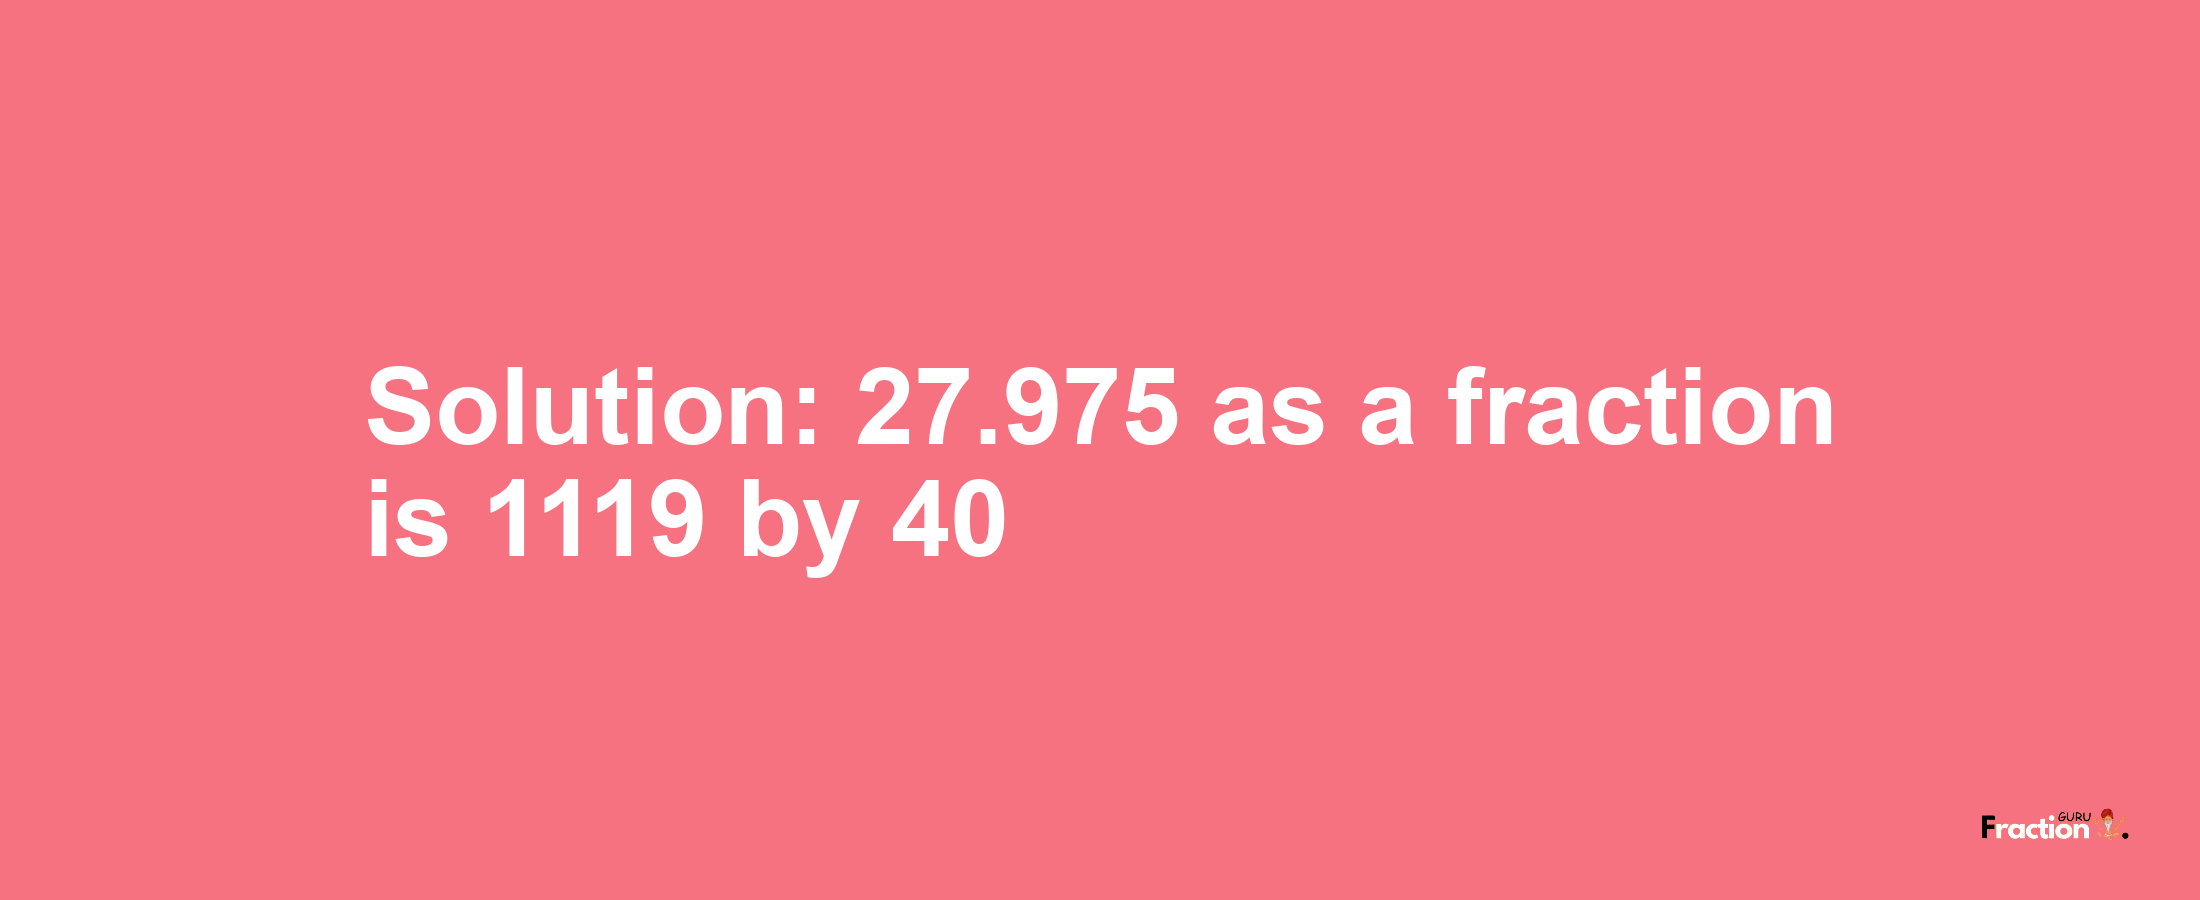 Solution:27.975 as a fraction is 1119/40